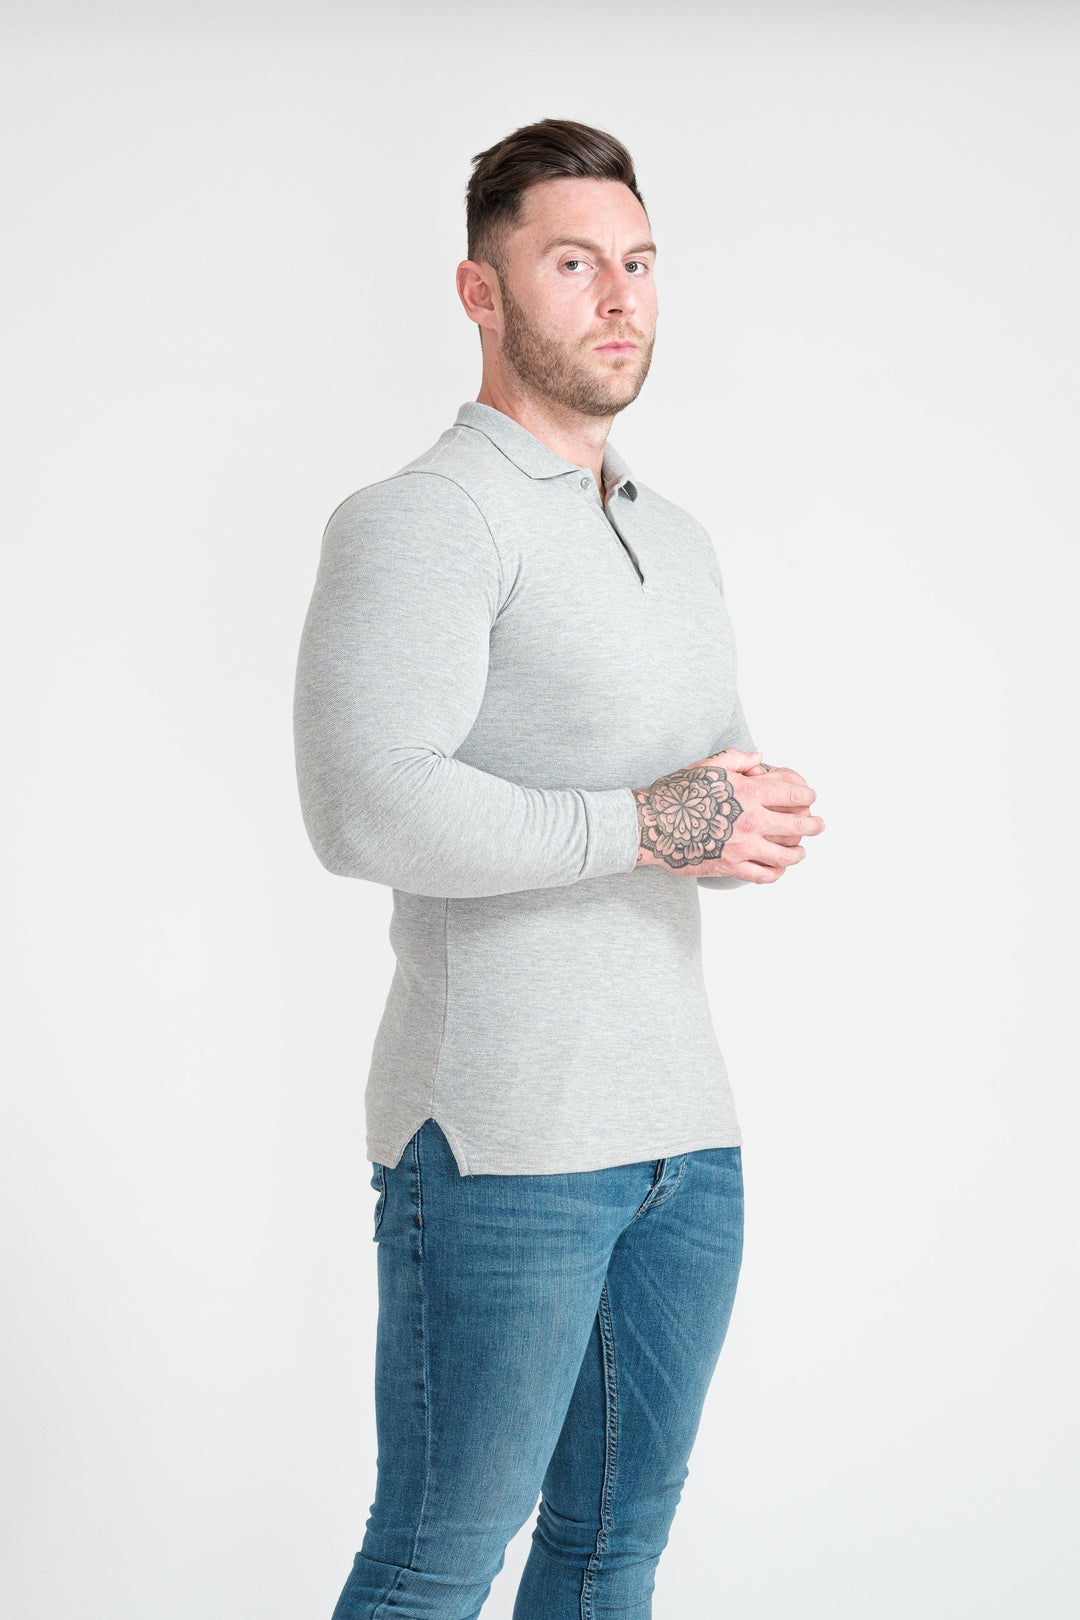 Mens Grey Tapered Fit Polo Shirt. A Proportionally Fitted and Muscle Fit Polo in Grey. Ideal for bodybuilders.